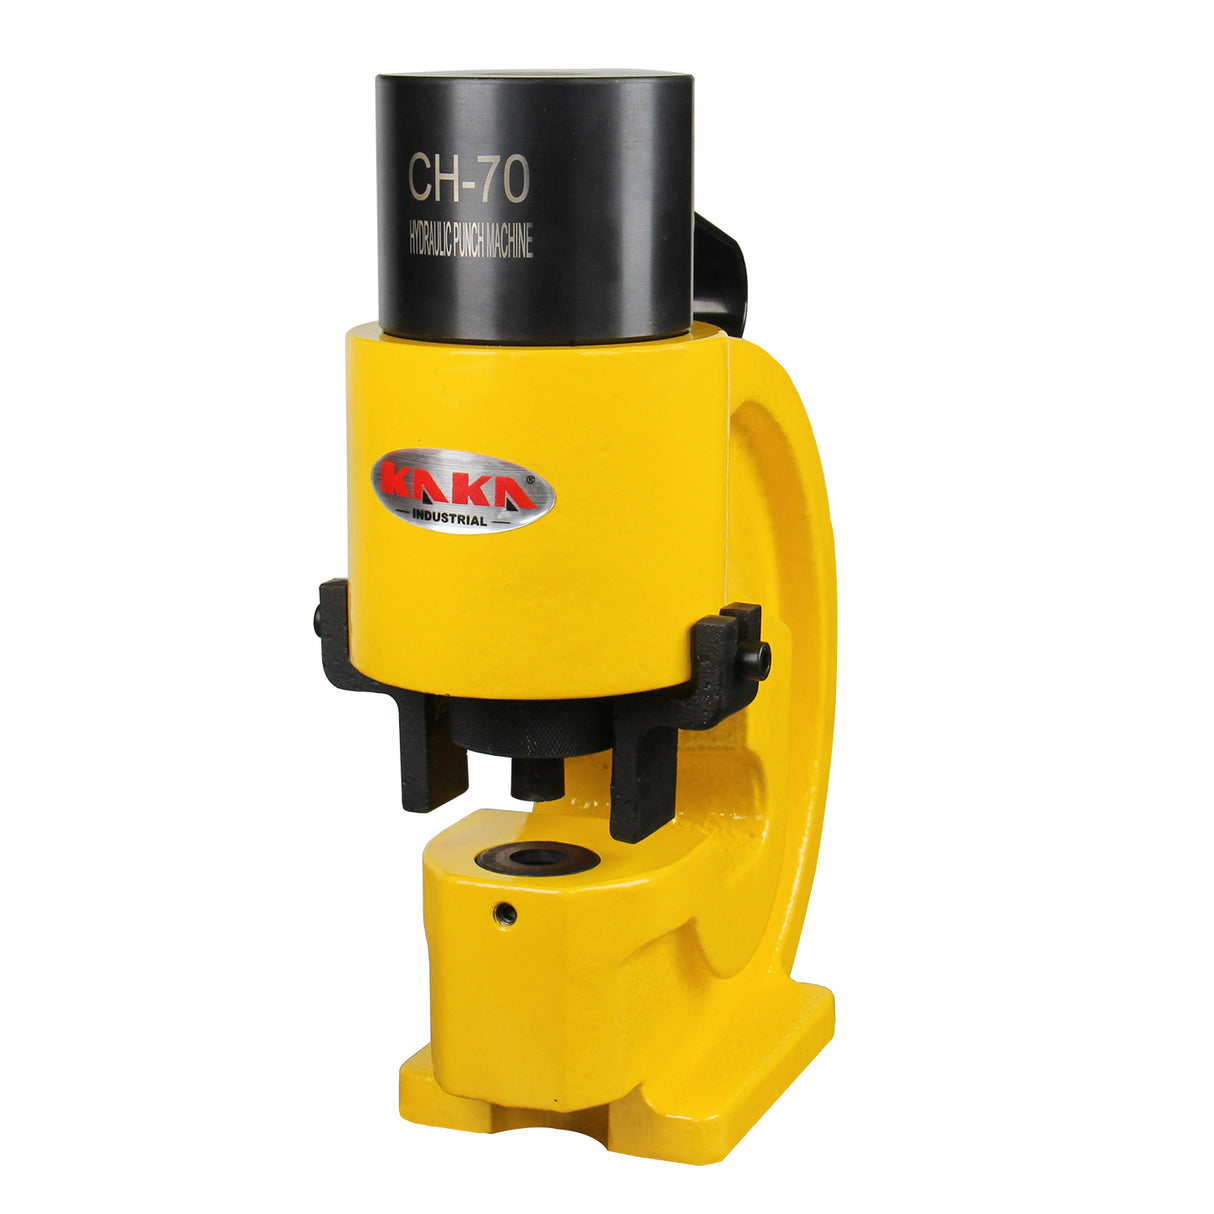 Hydraulic punch tool CH80 double-acting hydraulic punching machine iron  drilling